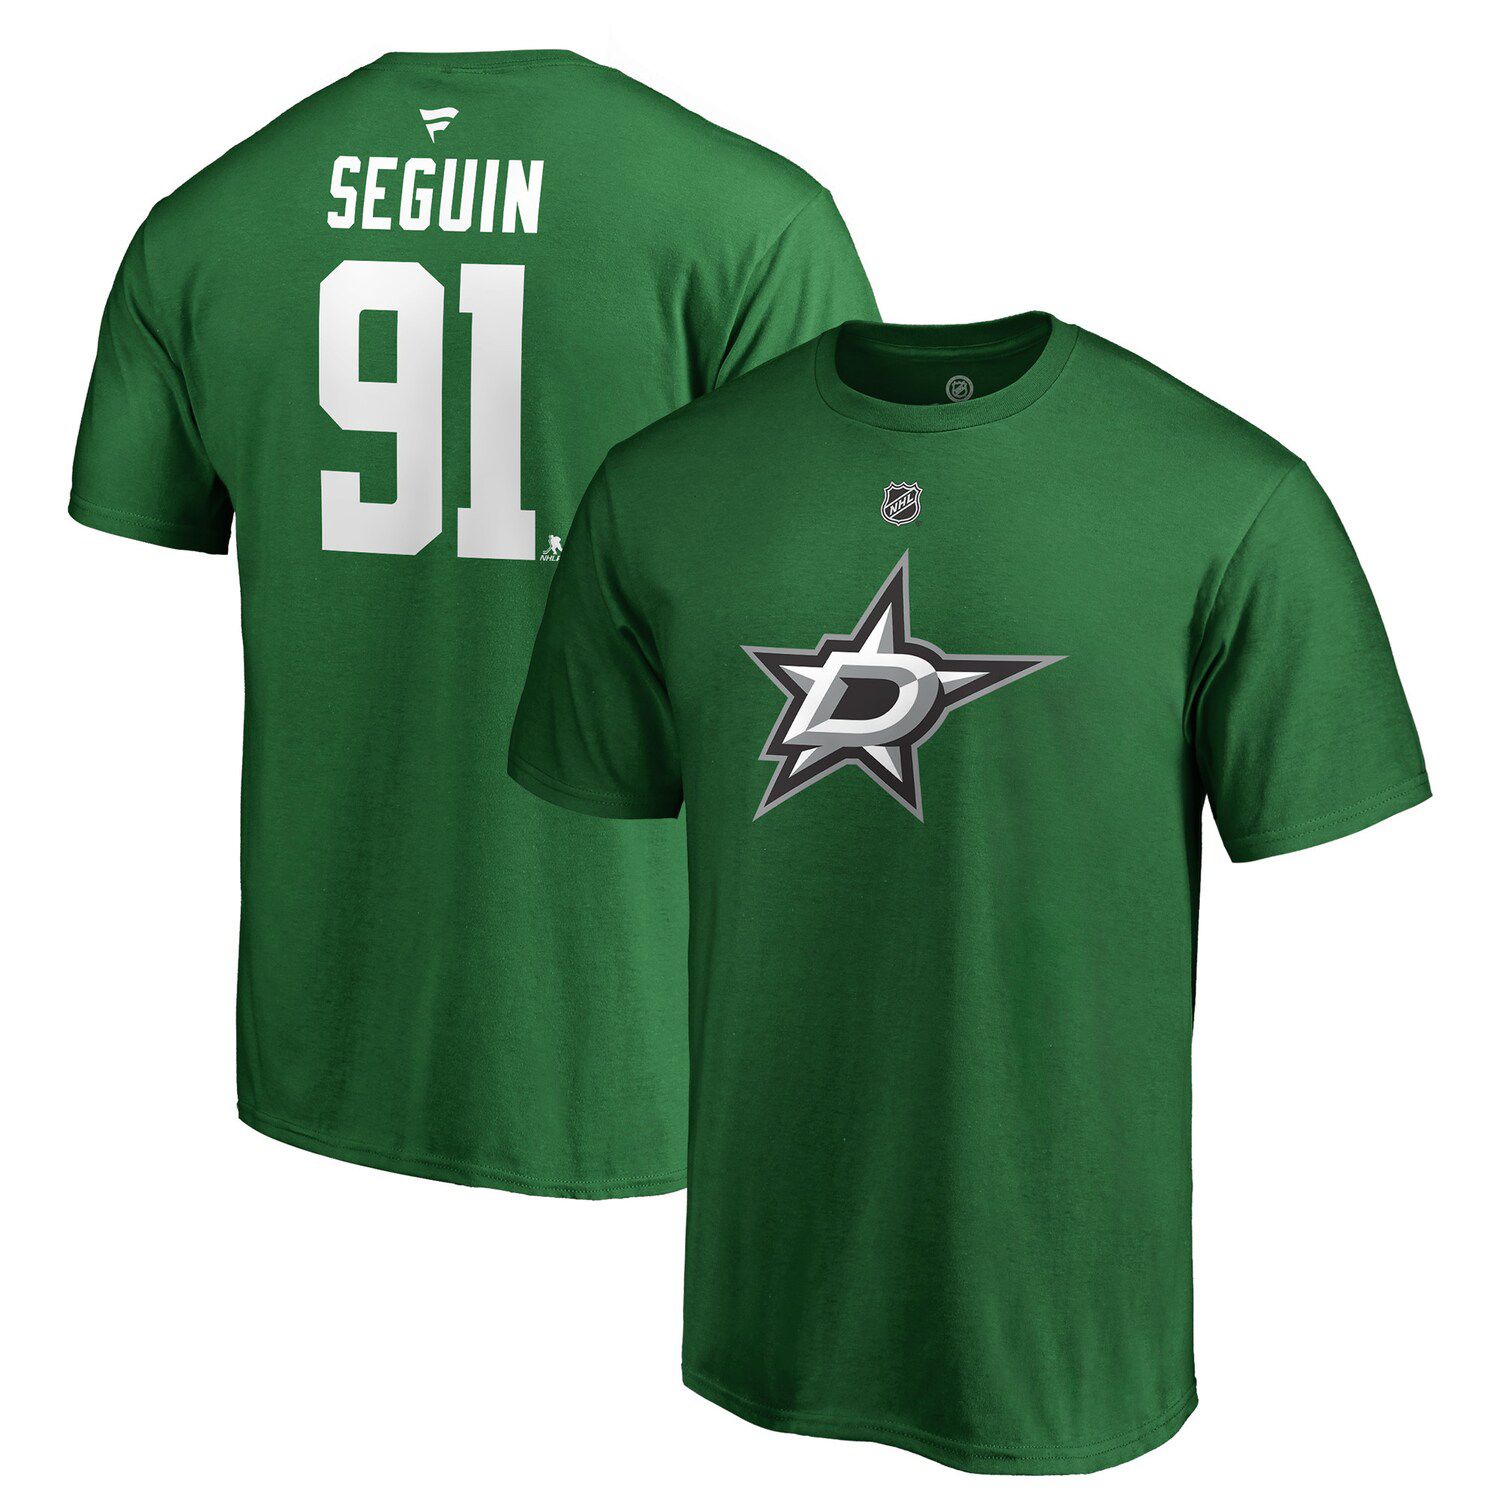 tyler seguin youth jersey